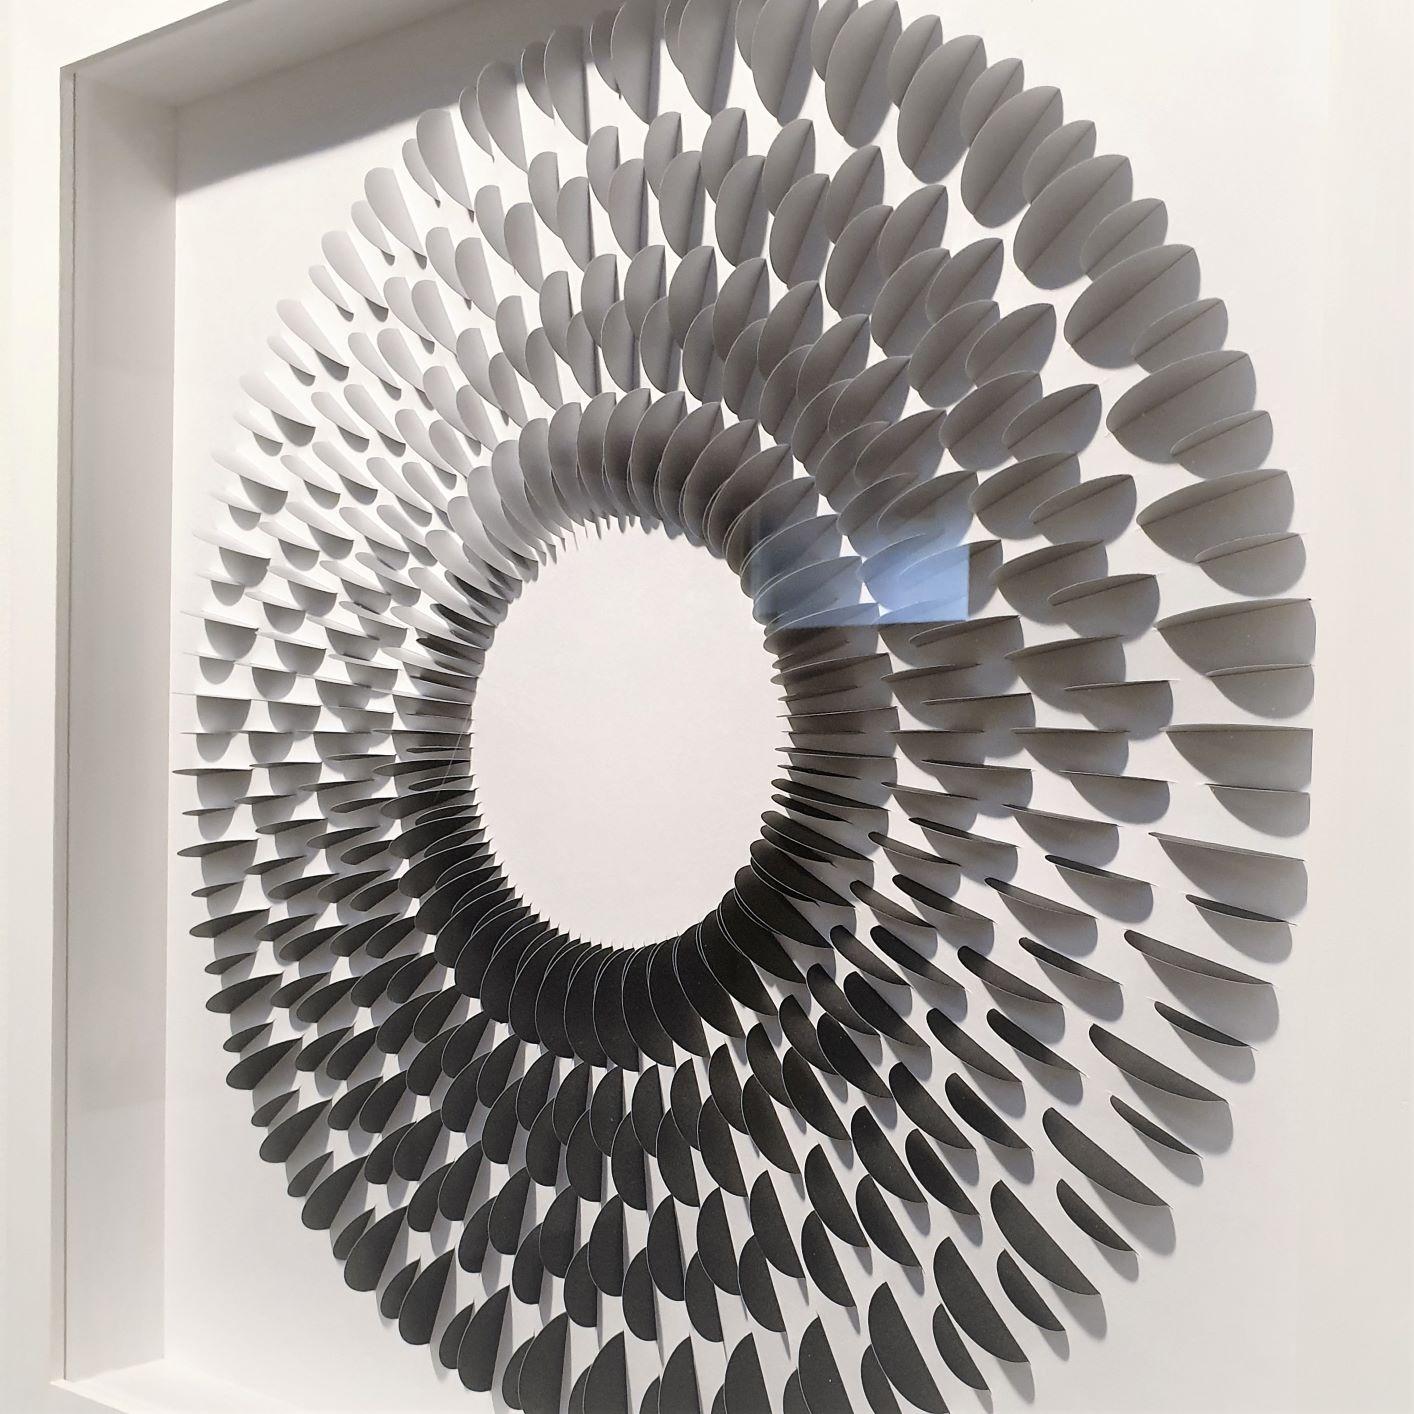 Modesta B&W is a unique contemporary modern paper relief by renowned Polish-Dutch artist Eliza Kopec. This relief is a typical example of her preferred minimalist abstract geometric vocabulary, formal and strict, but at the same time a visual beauty